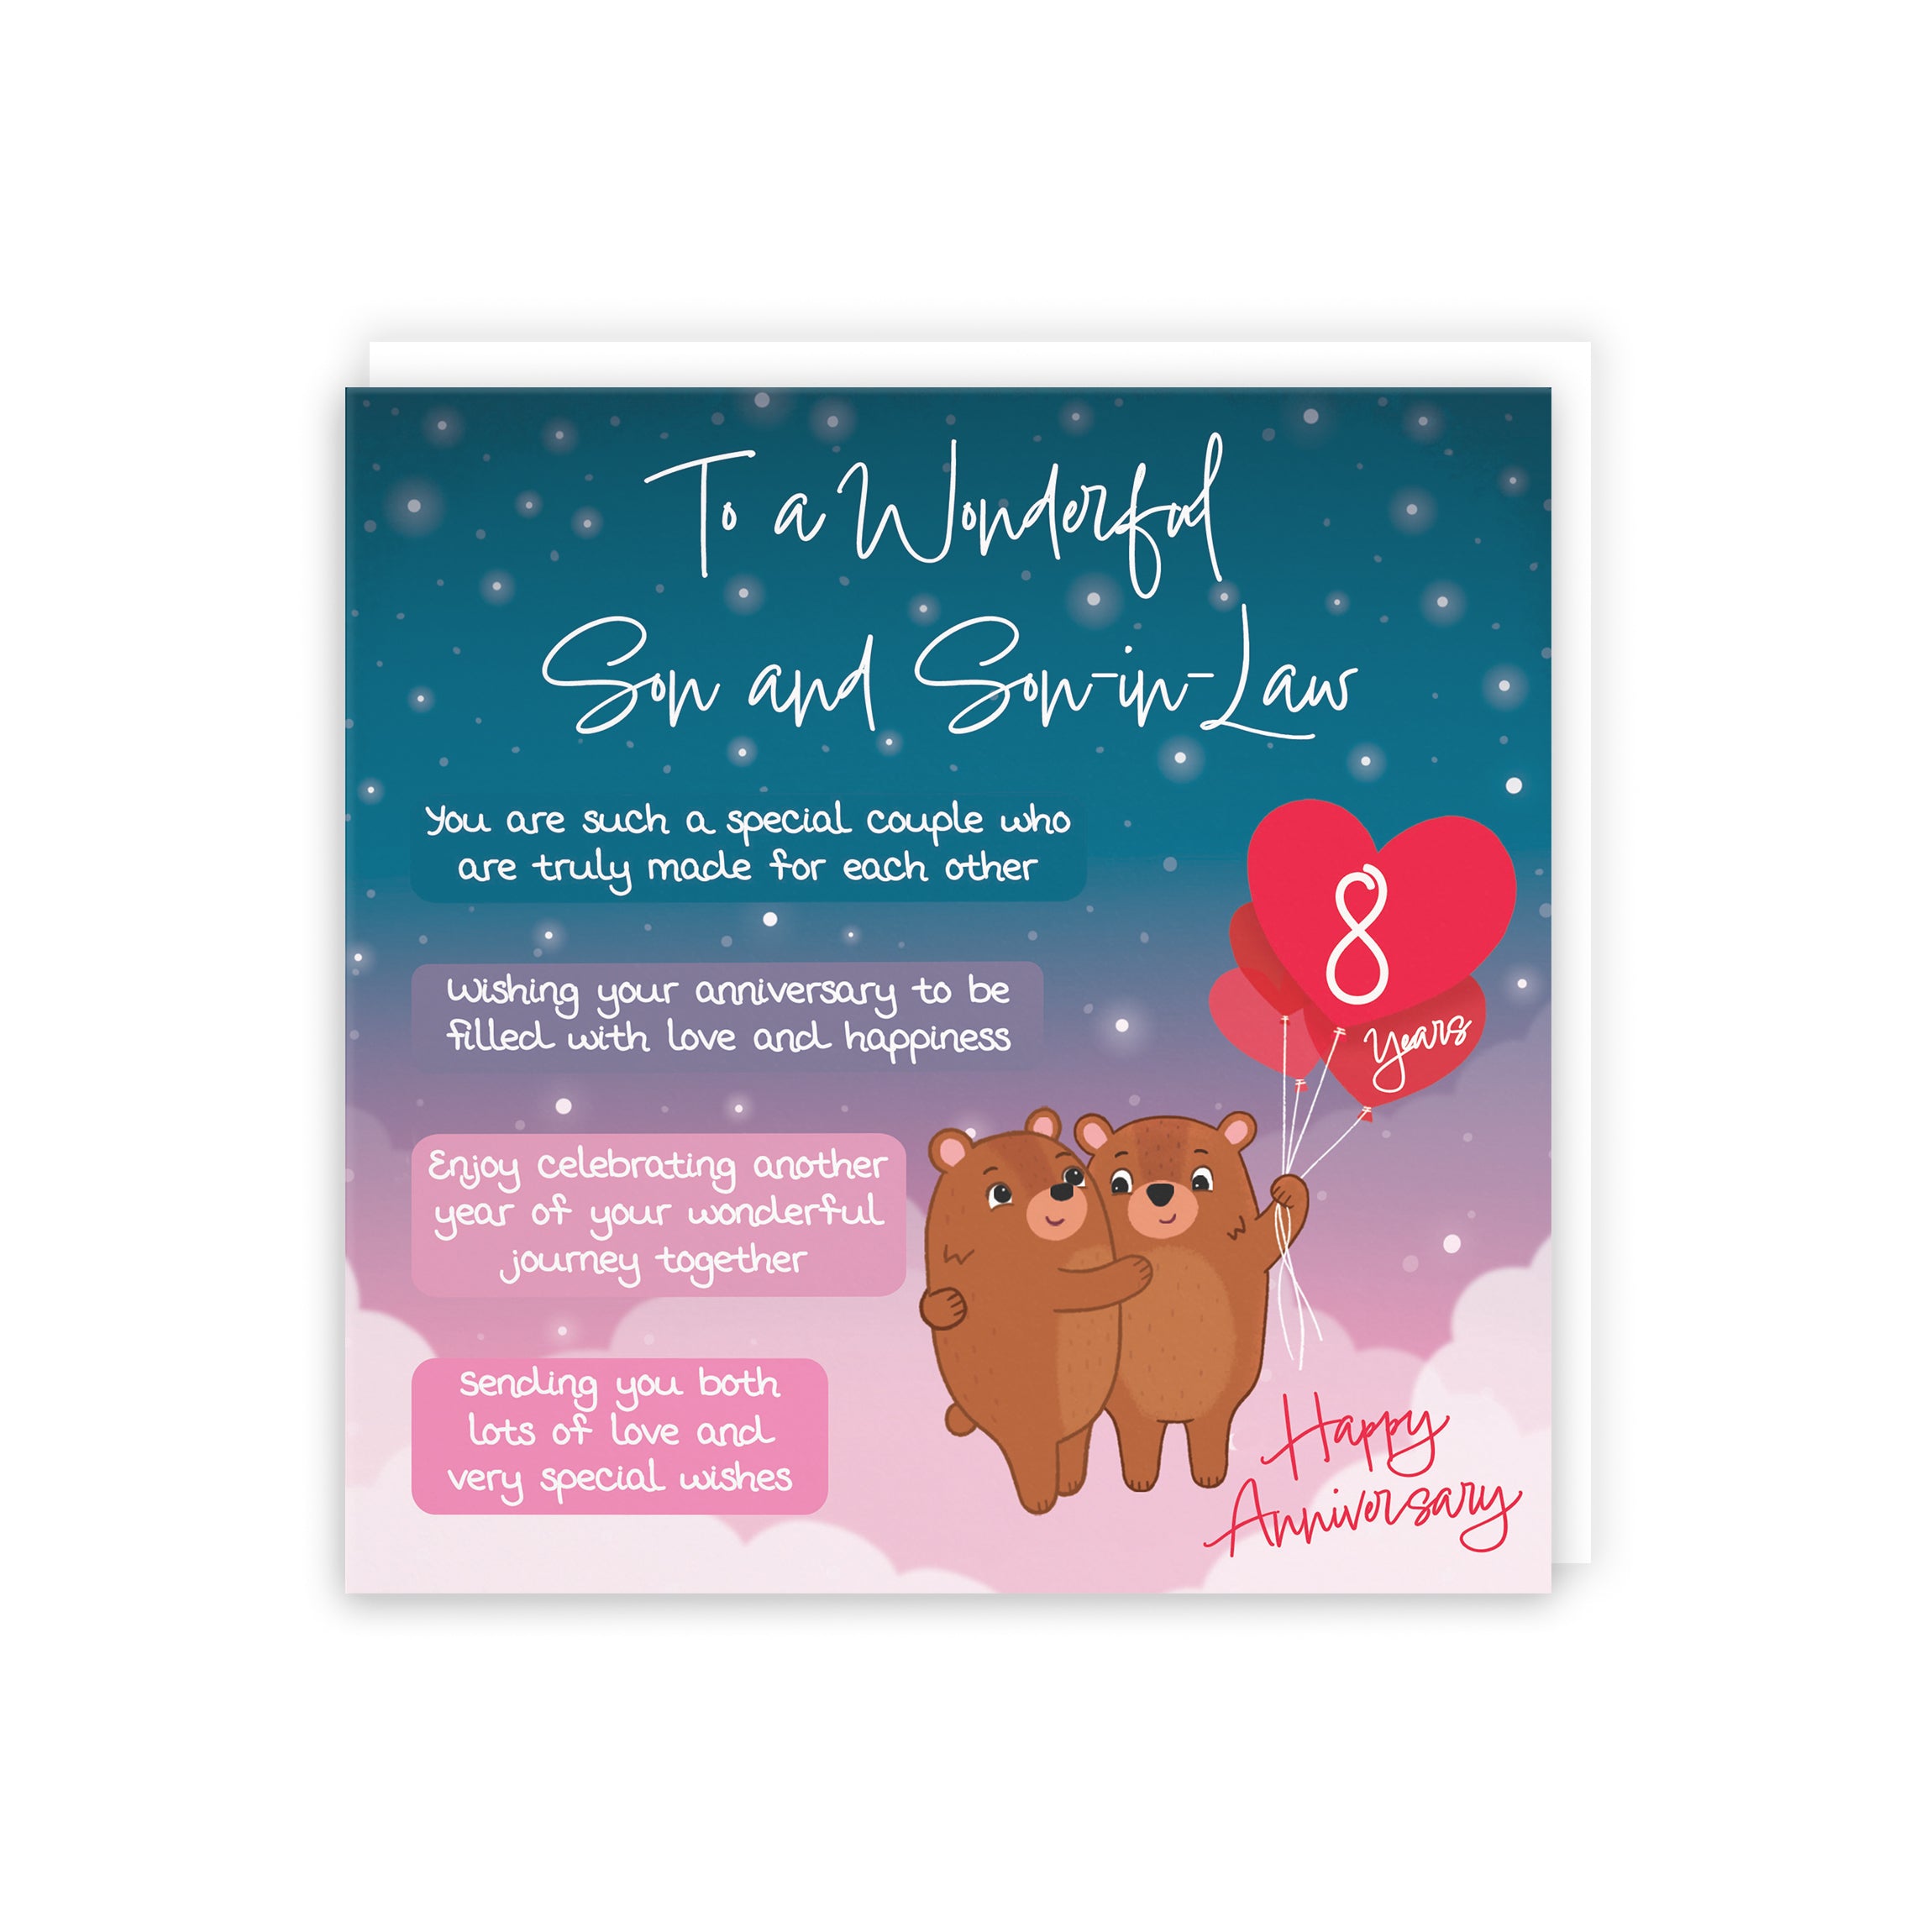 Son And Son In Law 8th Anniversary Card Starry Night Cute Bears